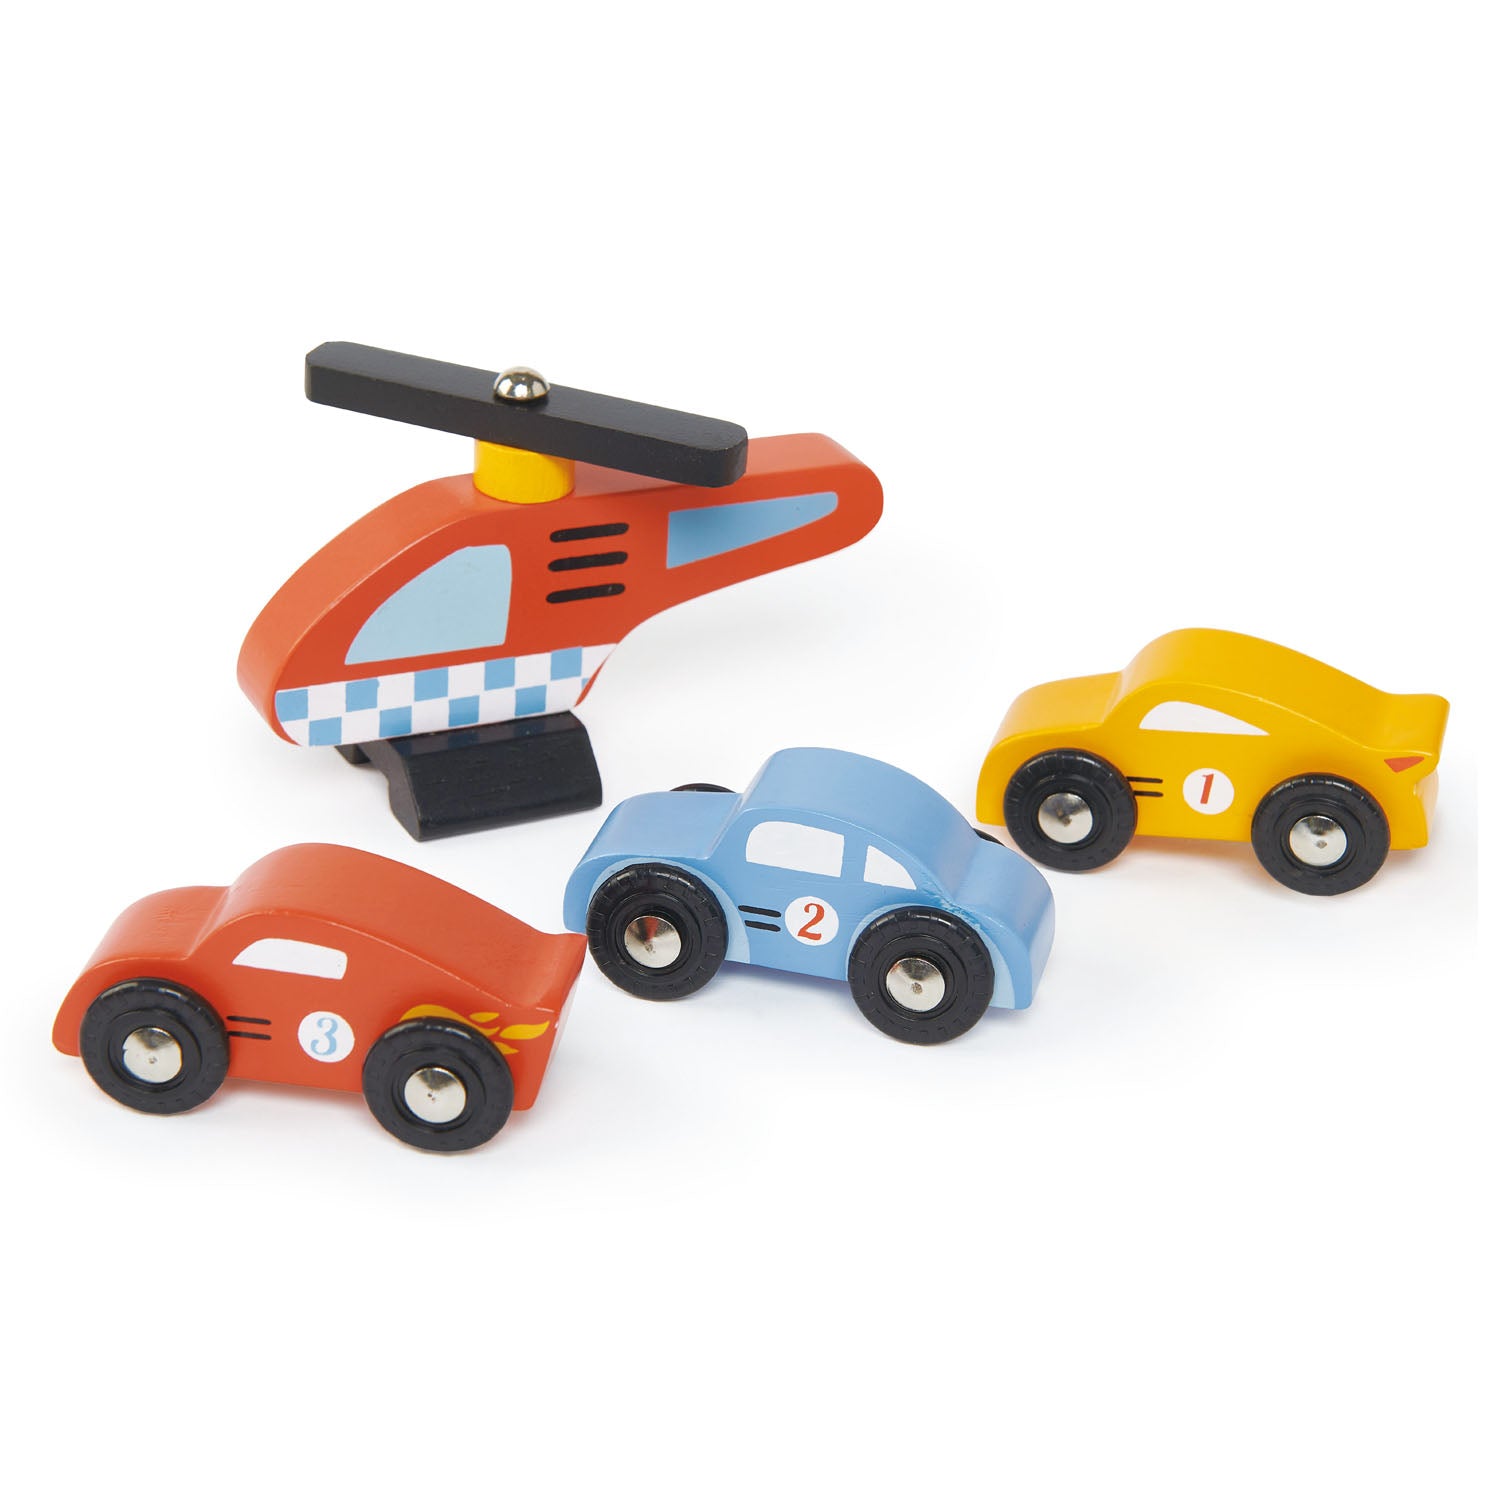 Three wooden cars and wooden helicopter which come with garage set